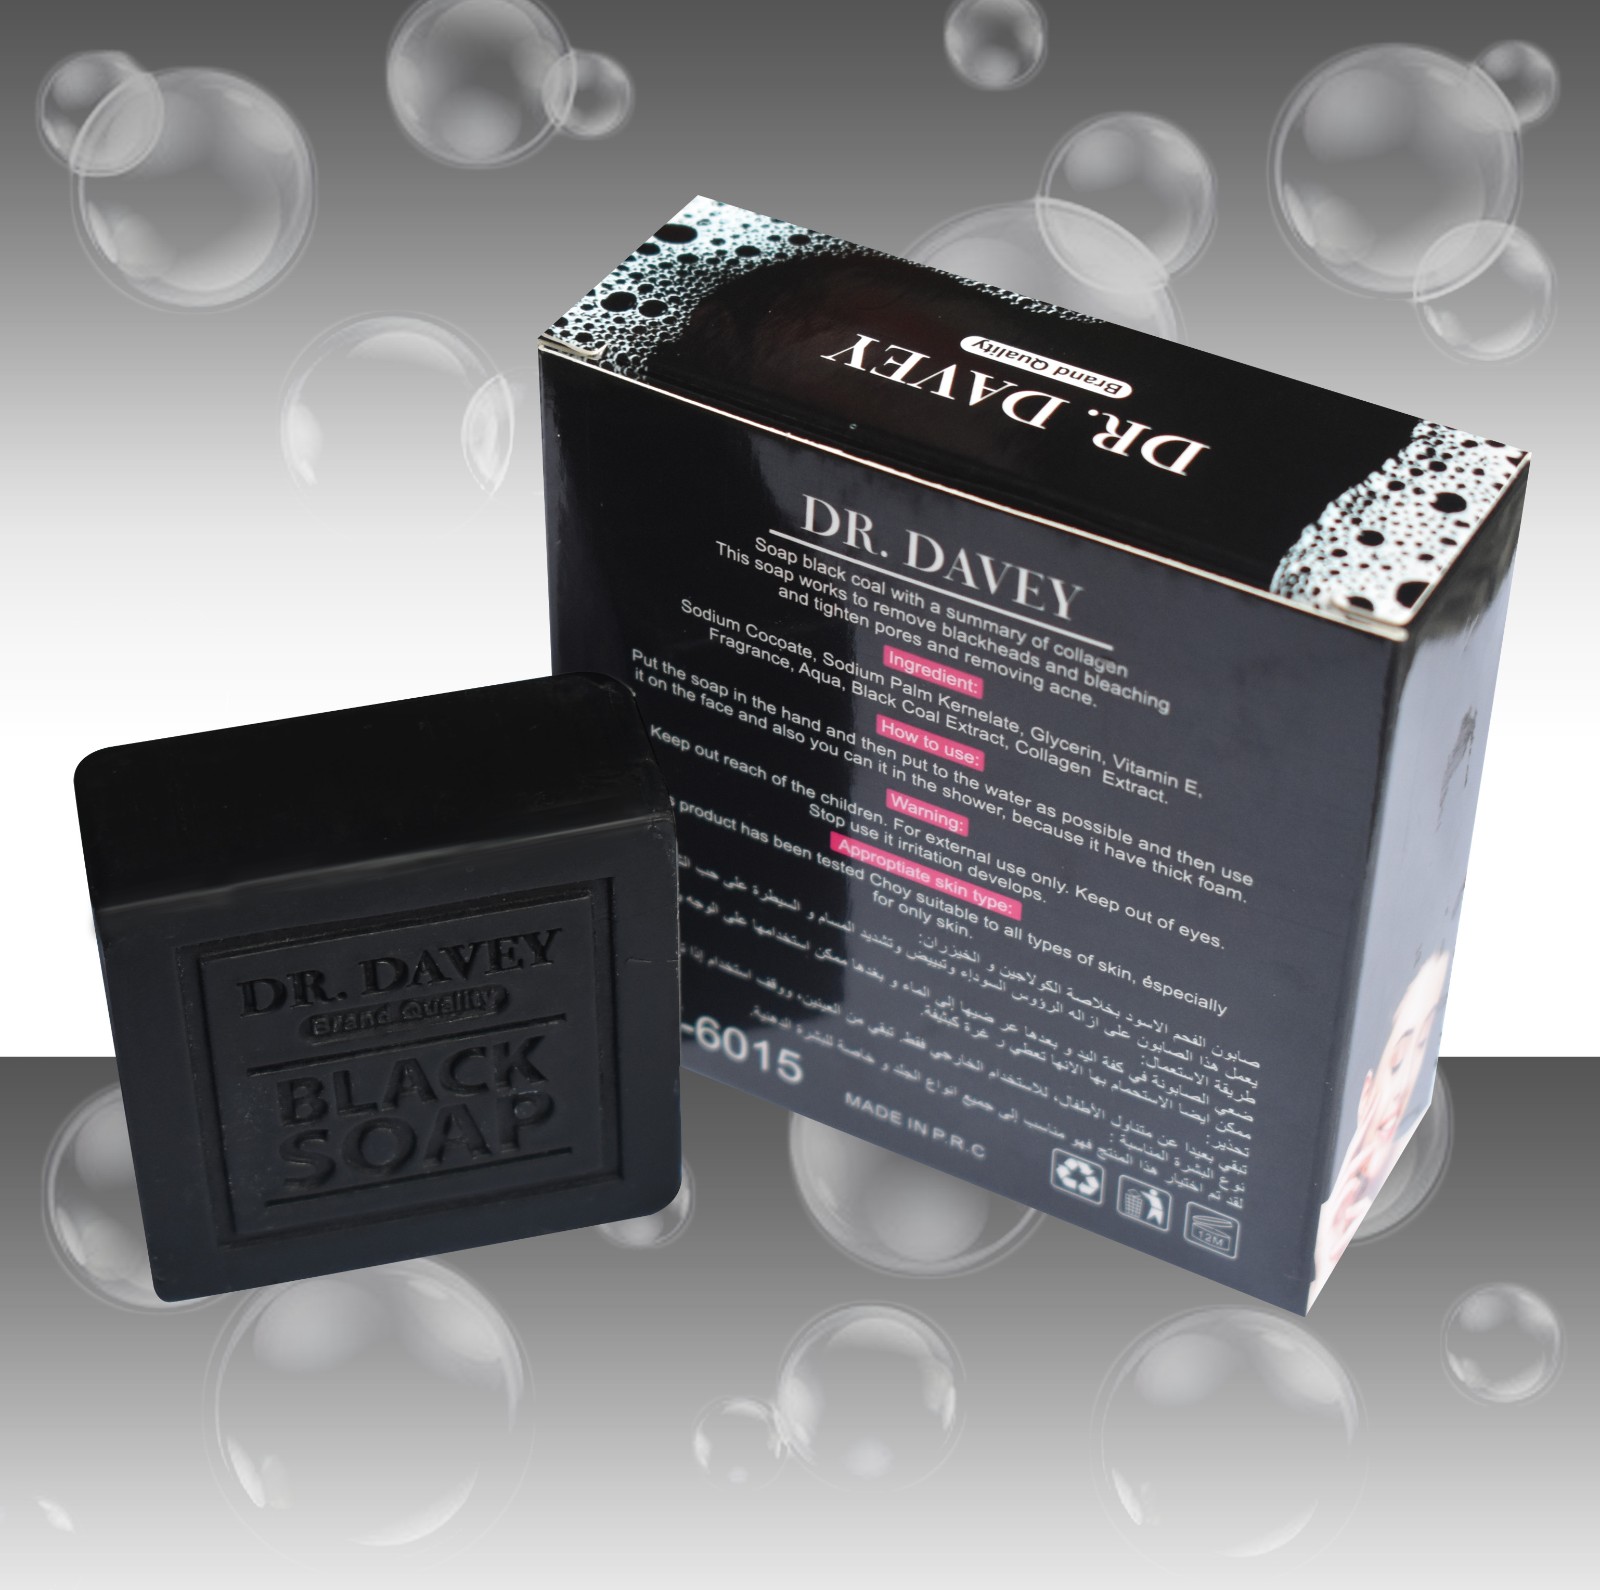 DR.DAVEY black charcoal soap cleaning whitening soap